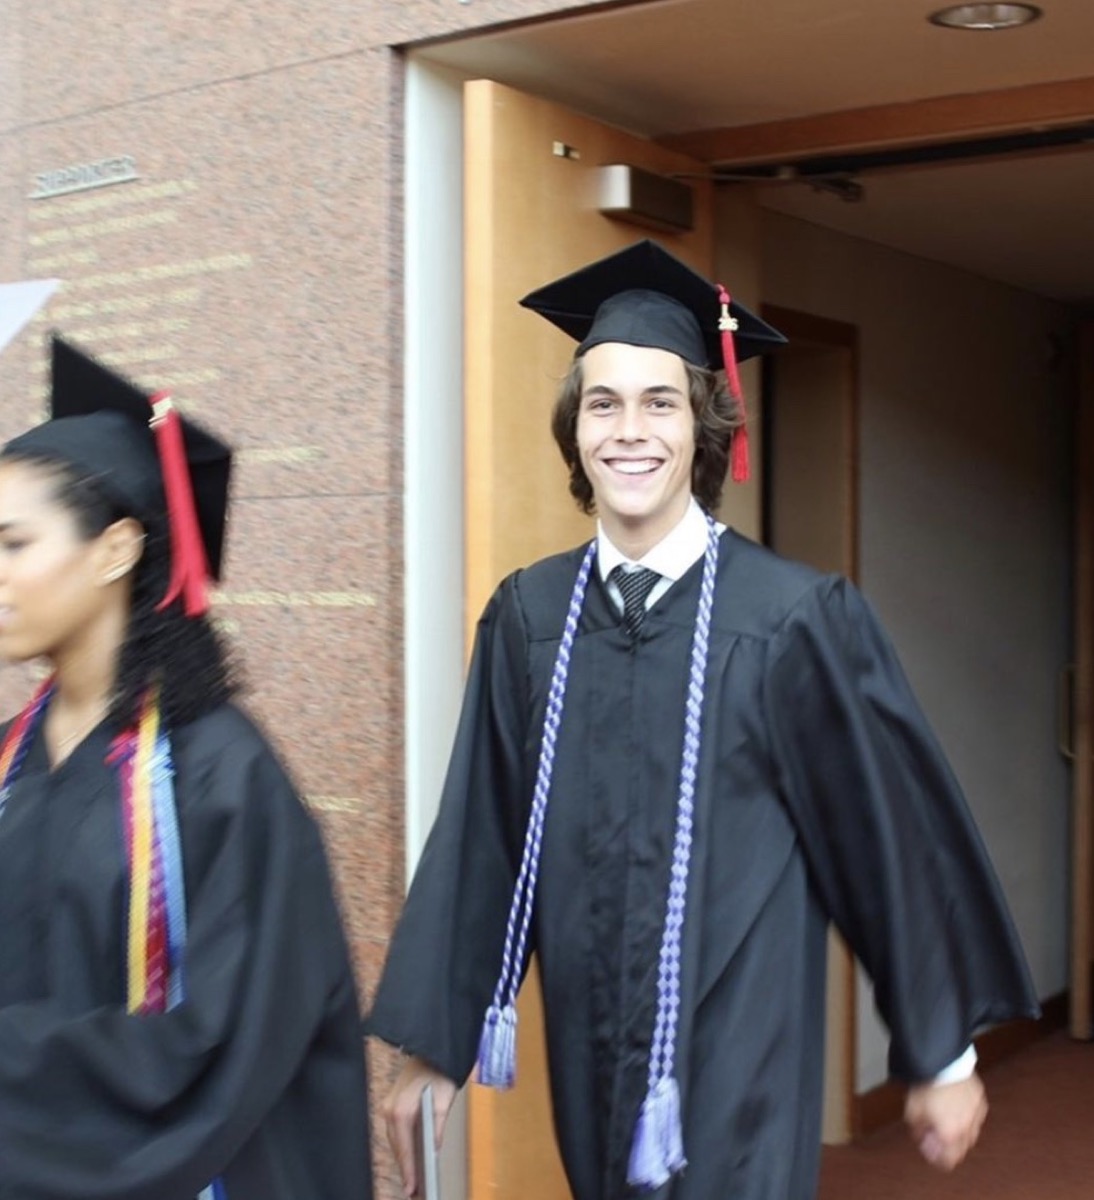 flynn busson in cap and gown emerging from a brick building